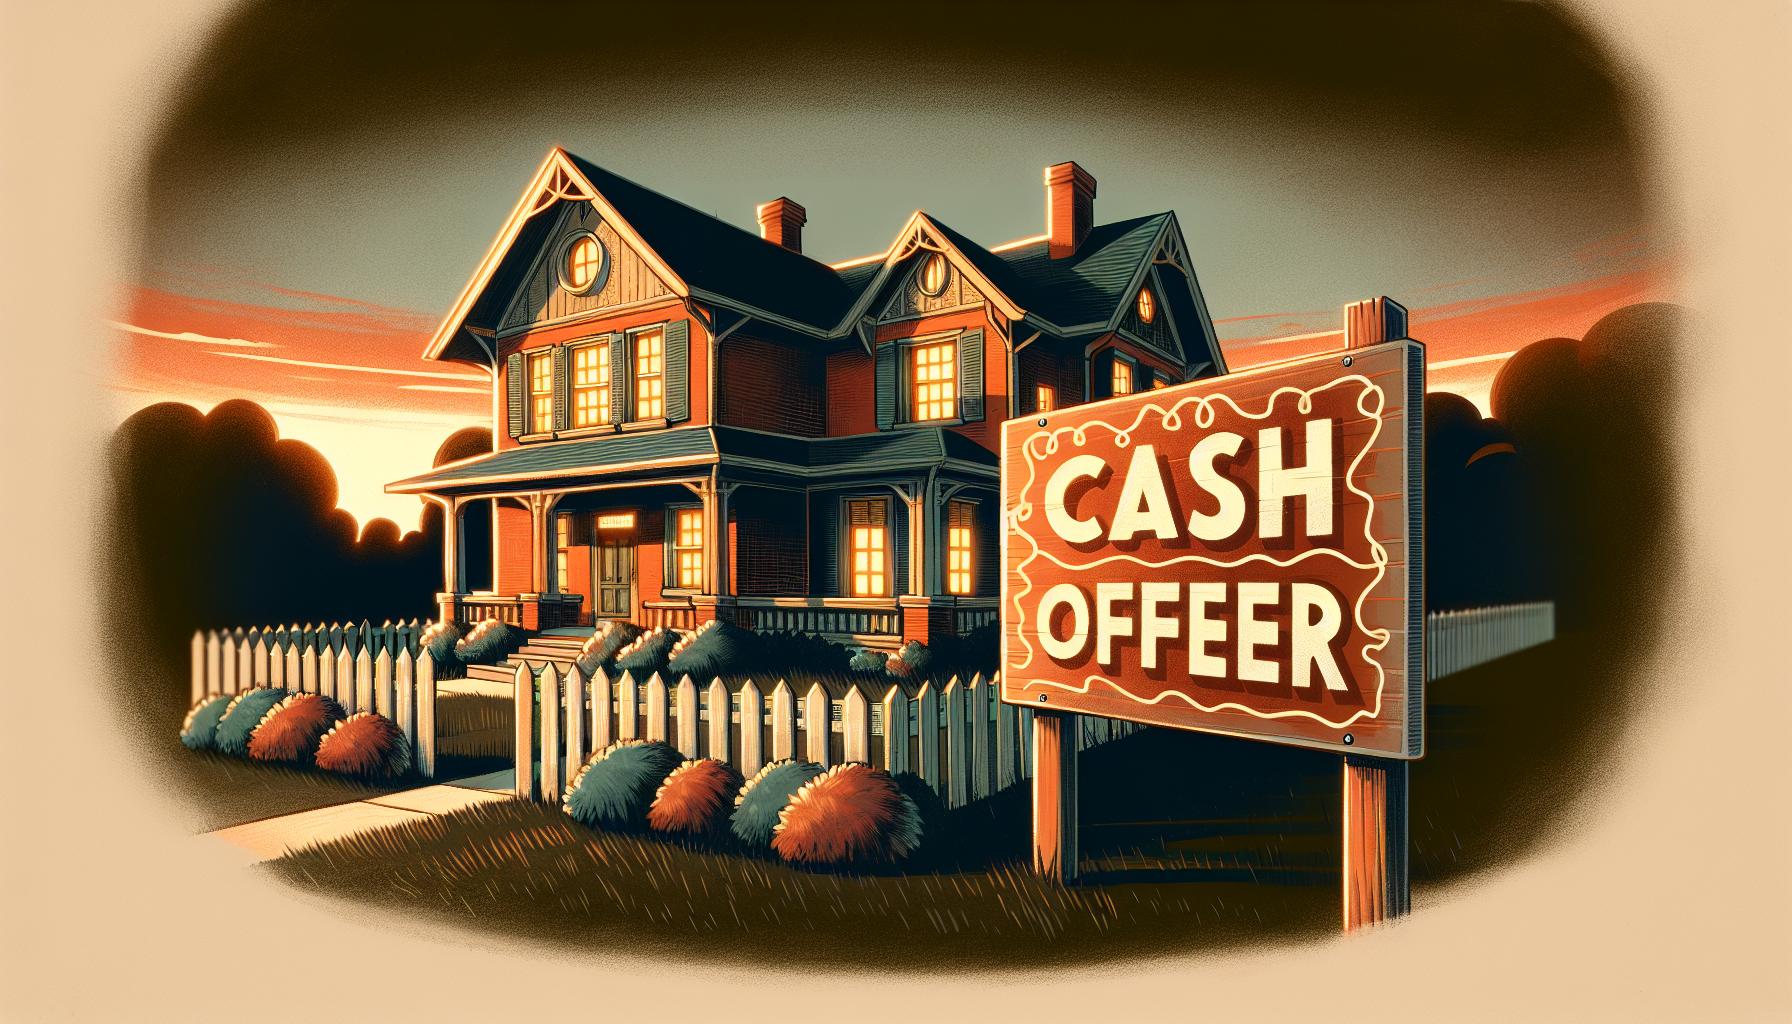 Illustration of a house with a cash offer sign